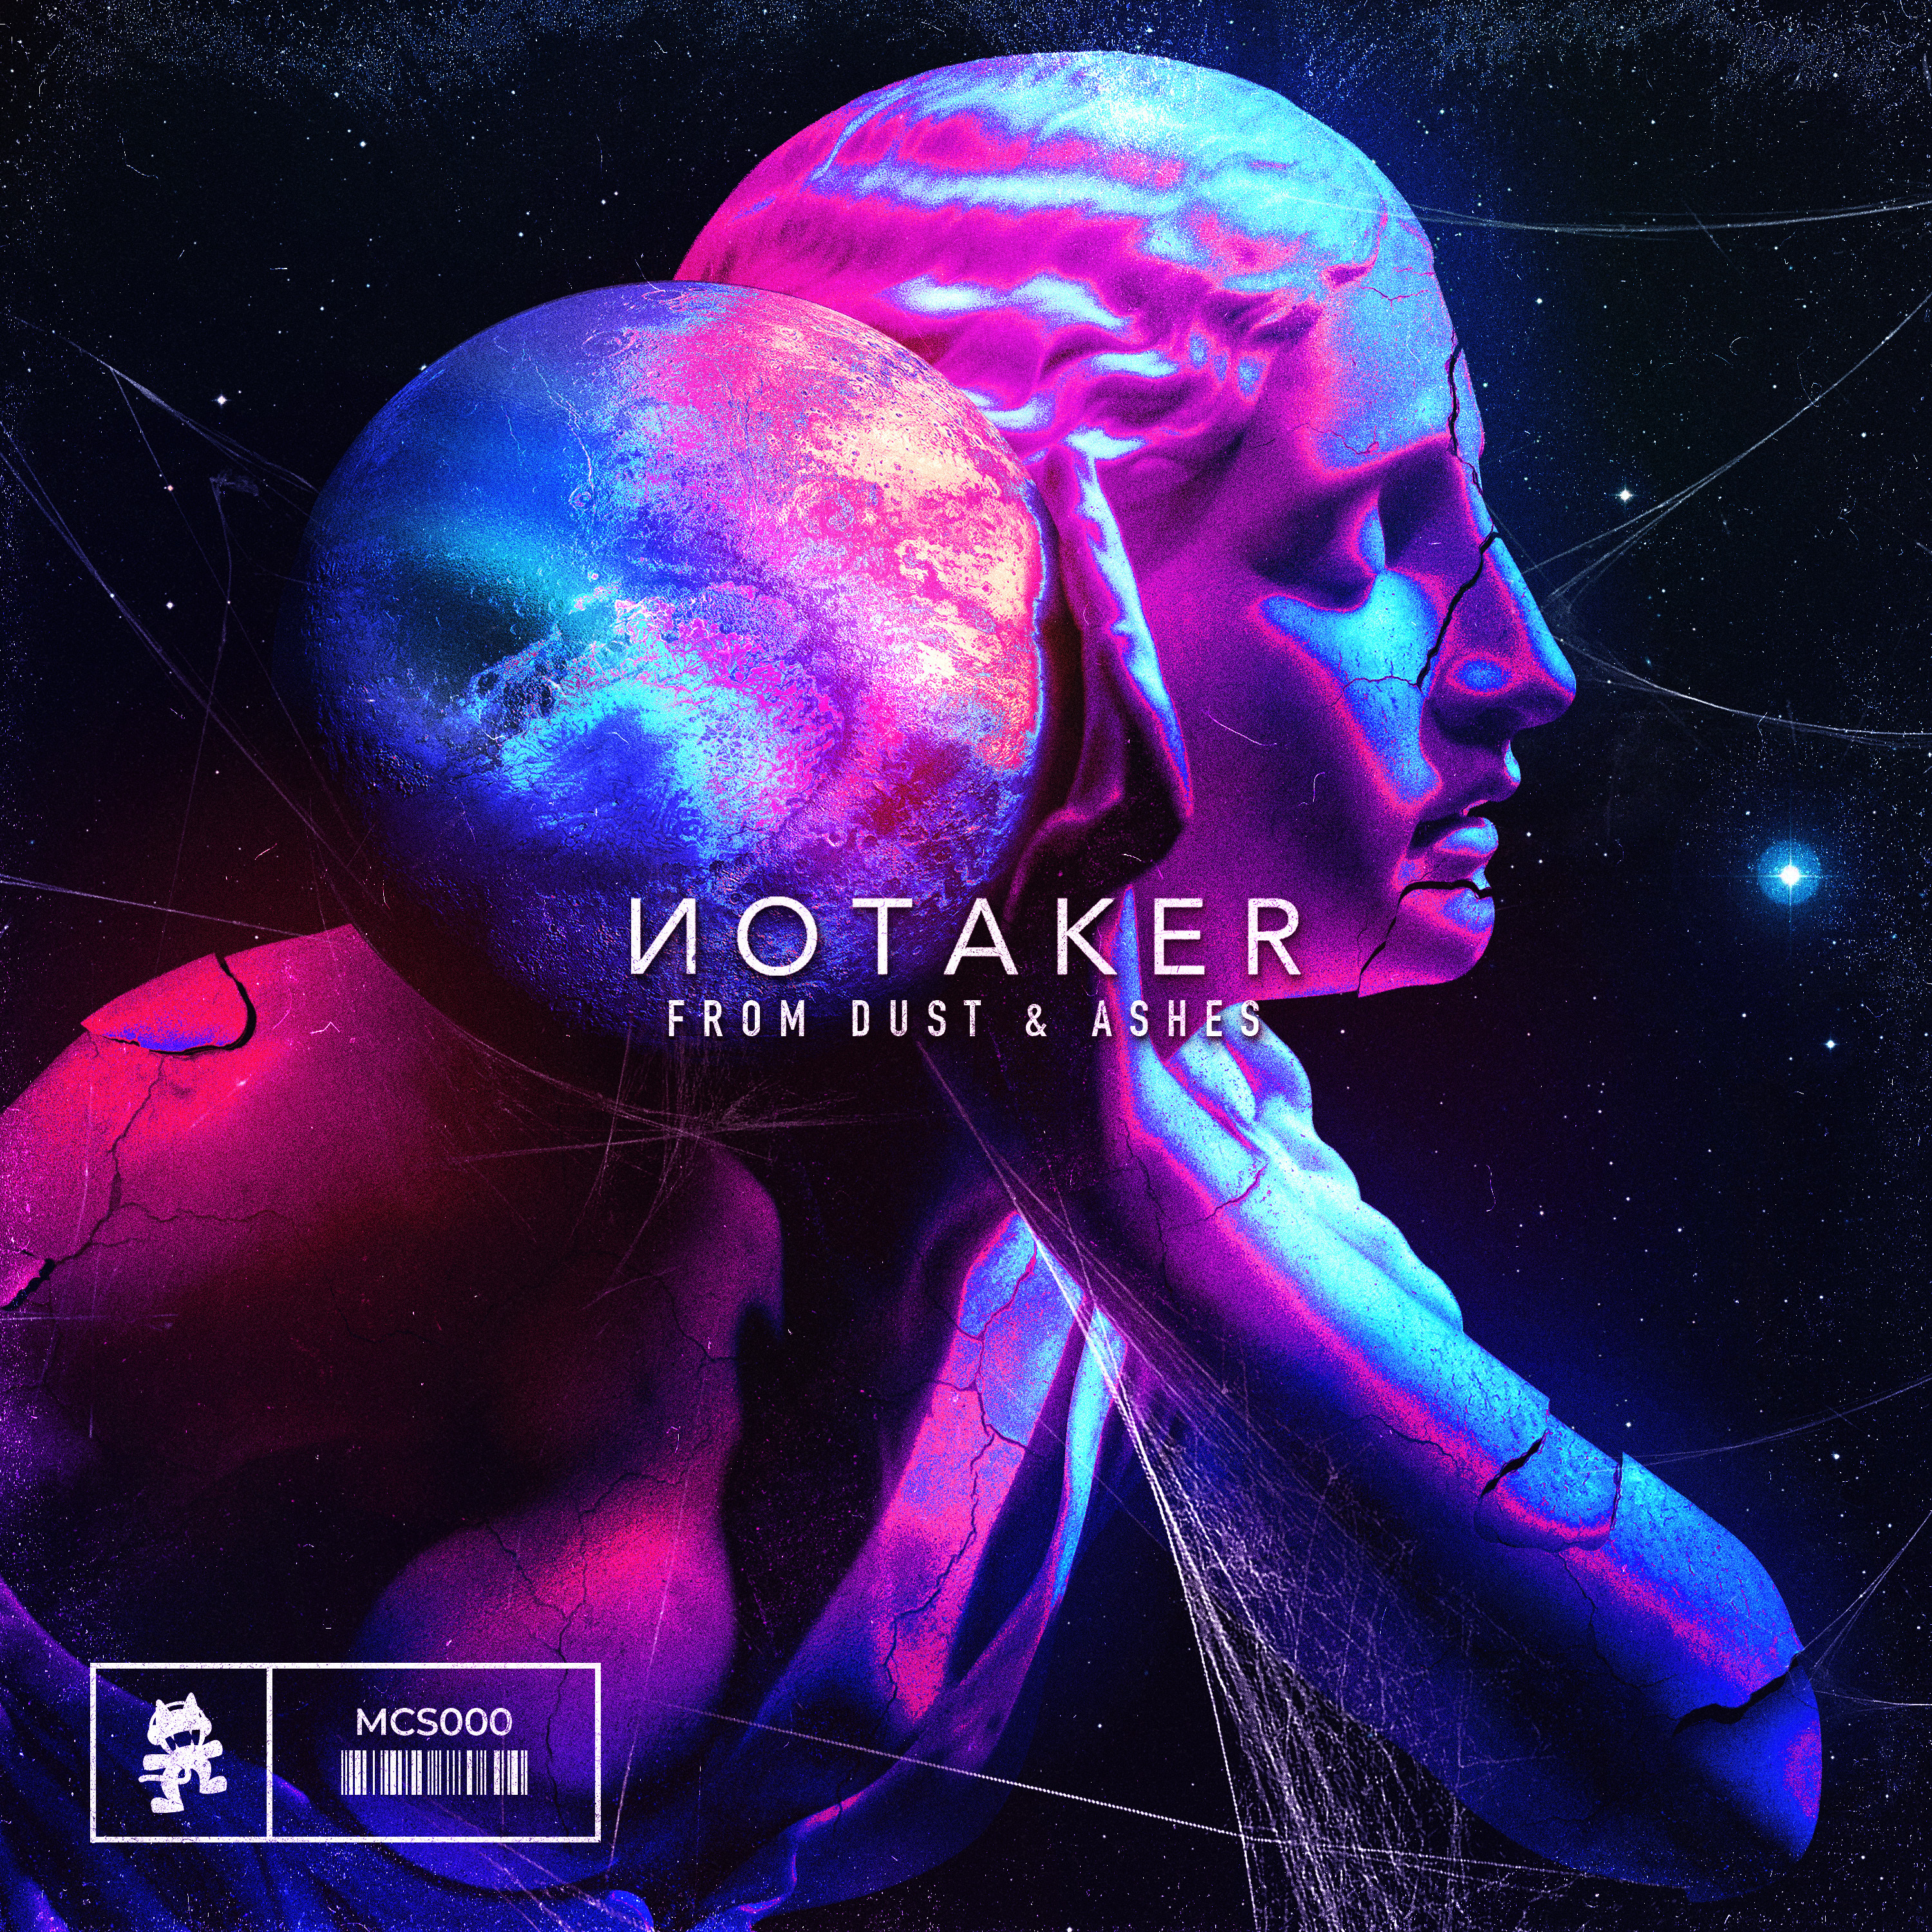 Notaker Returns With Immersive Progressive Single, ‘From Dust & Ashes’